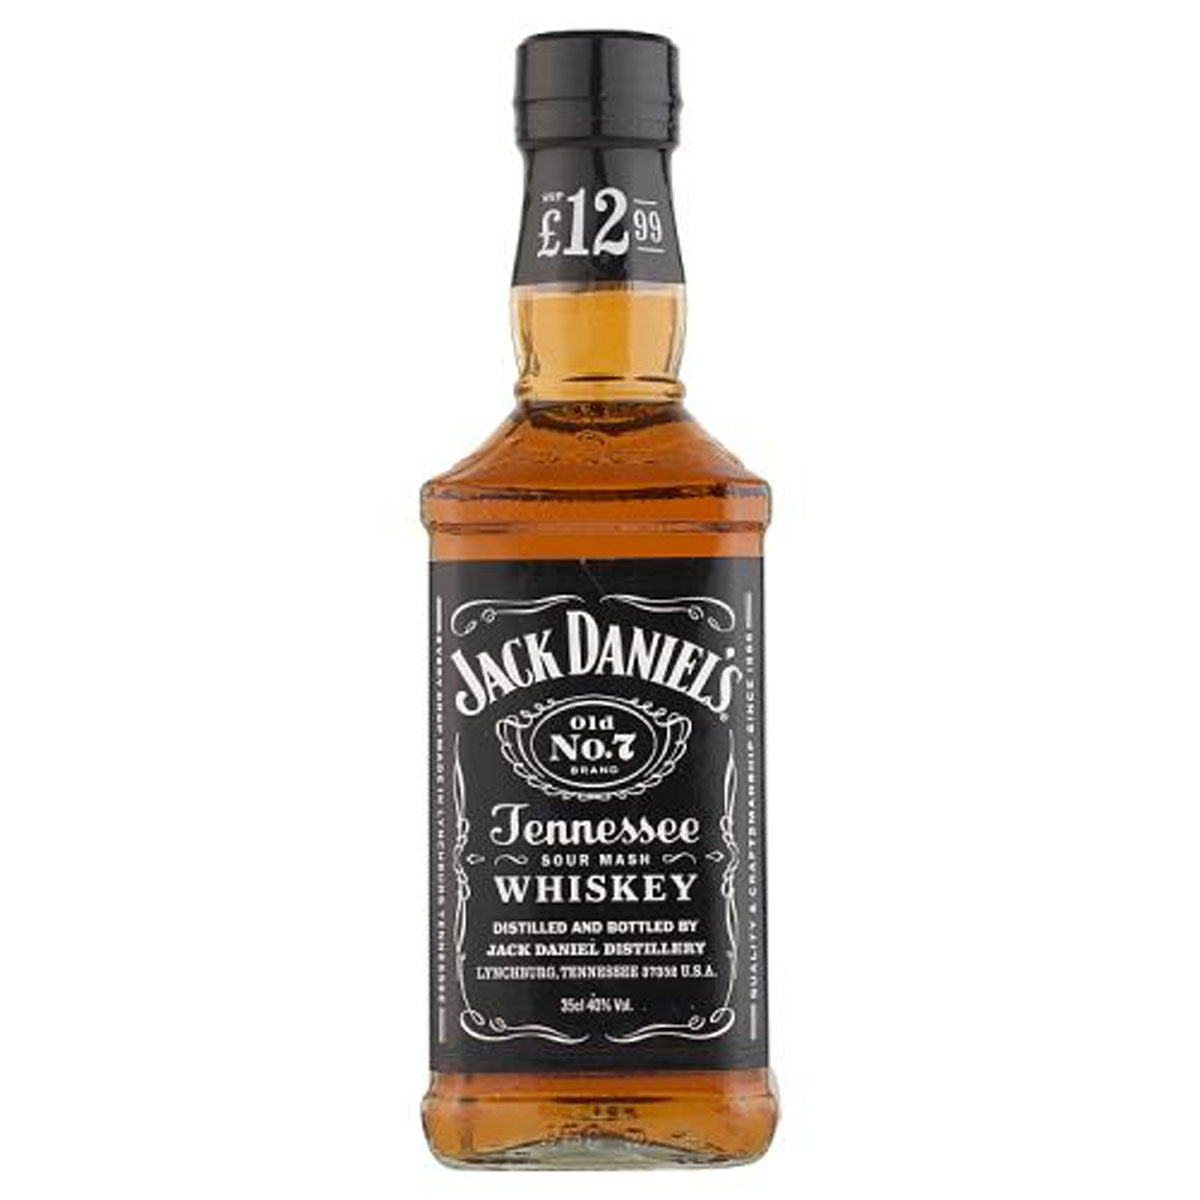 A bottle of Jack Daniels - Old No 7 Tennessee Whiskey (40.0% ABV) - 35cl on a white background.